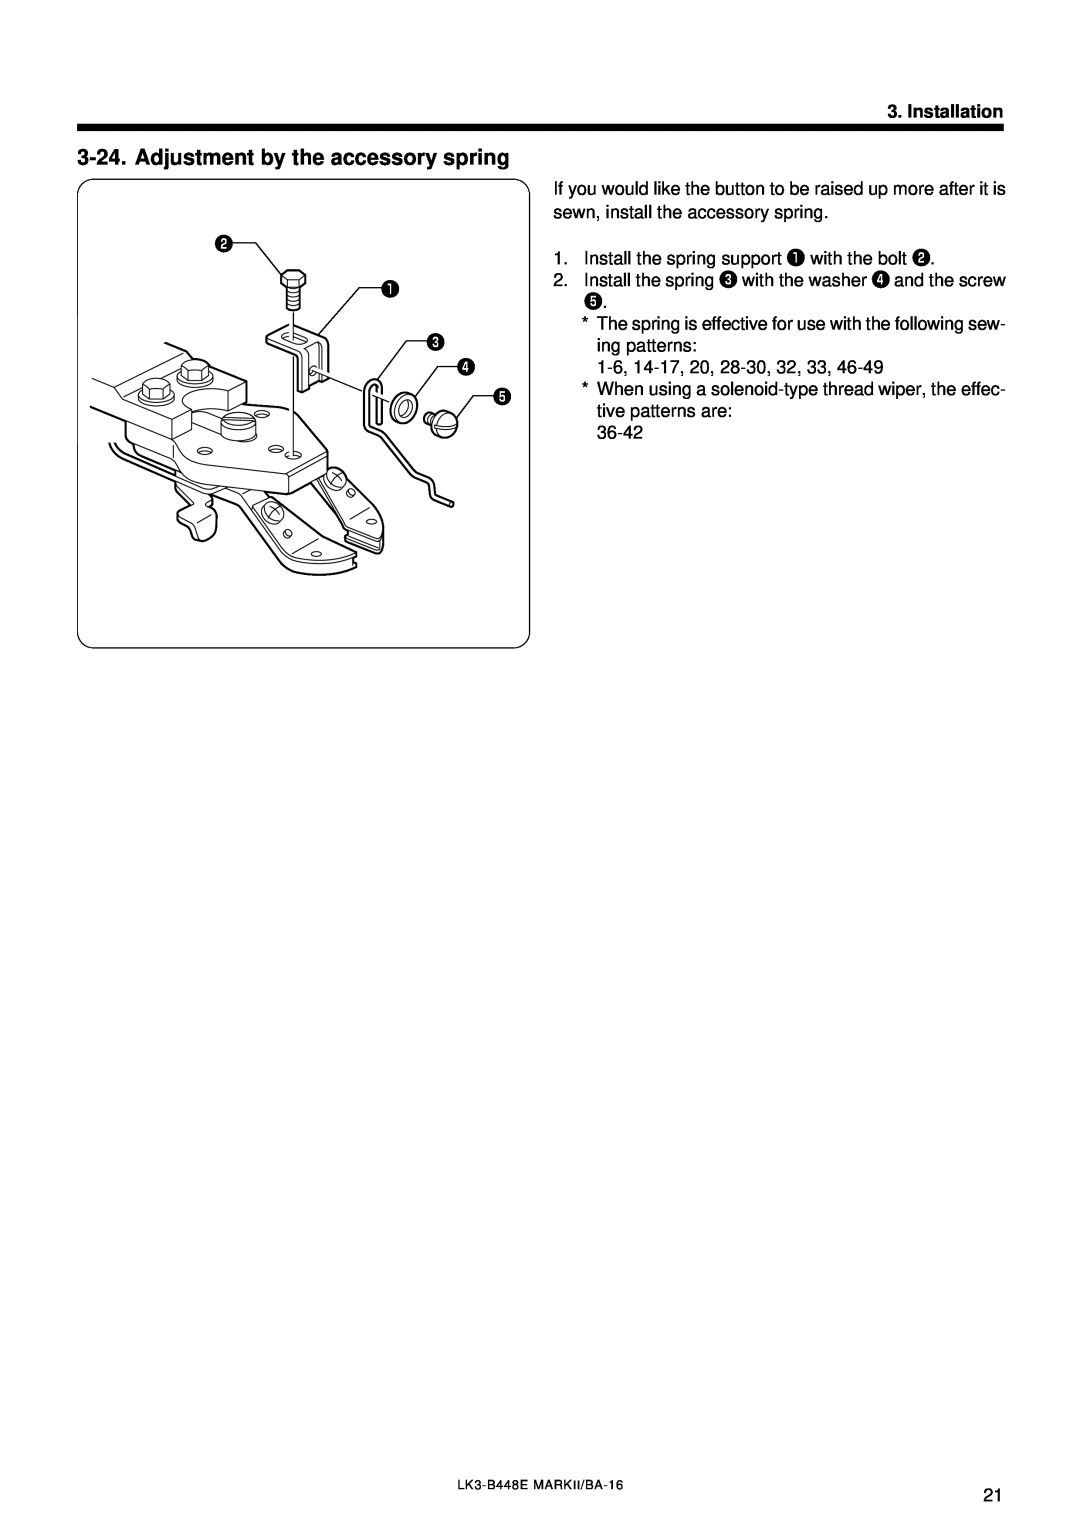 Brother LK3-B448E instruction manual Adjustment by the accessory spring, Installation 